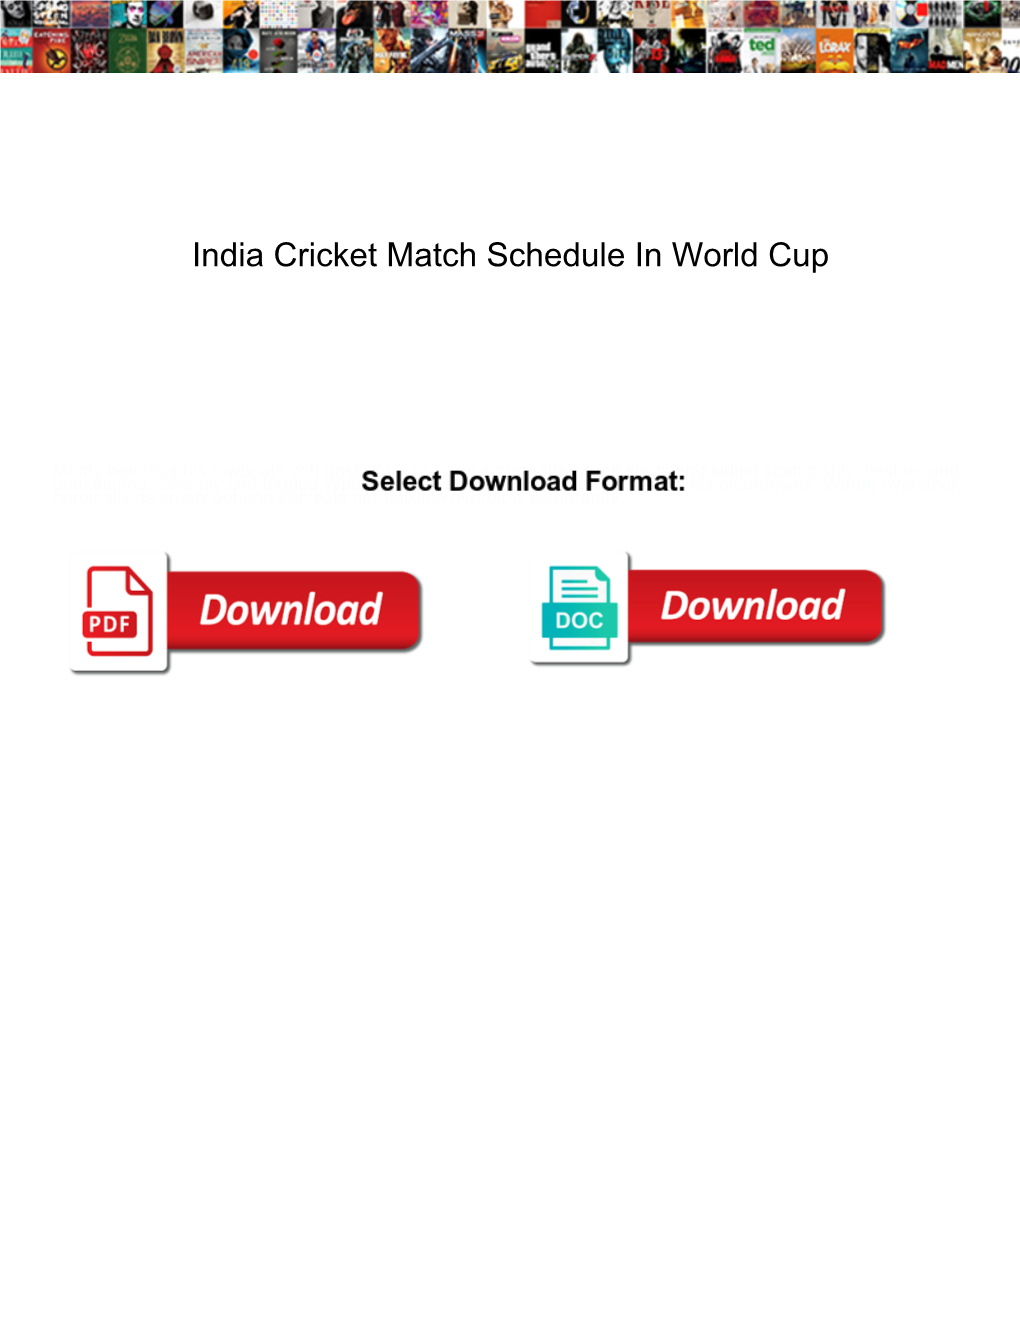 India Cricket Match Schedule in World Cup